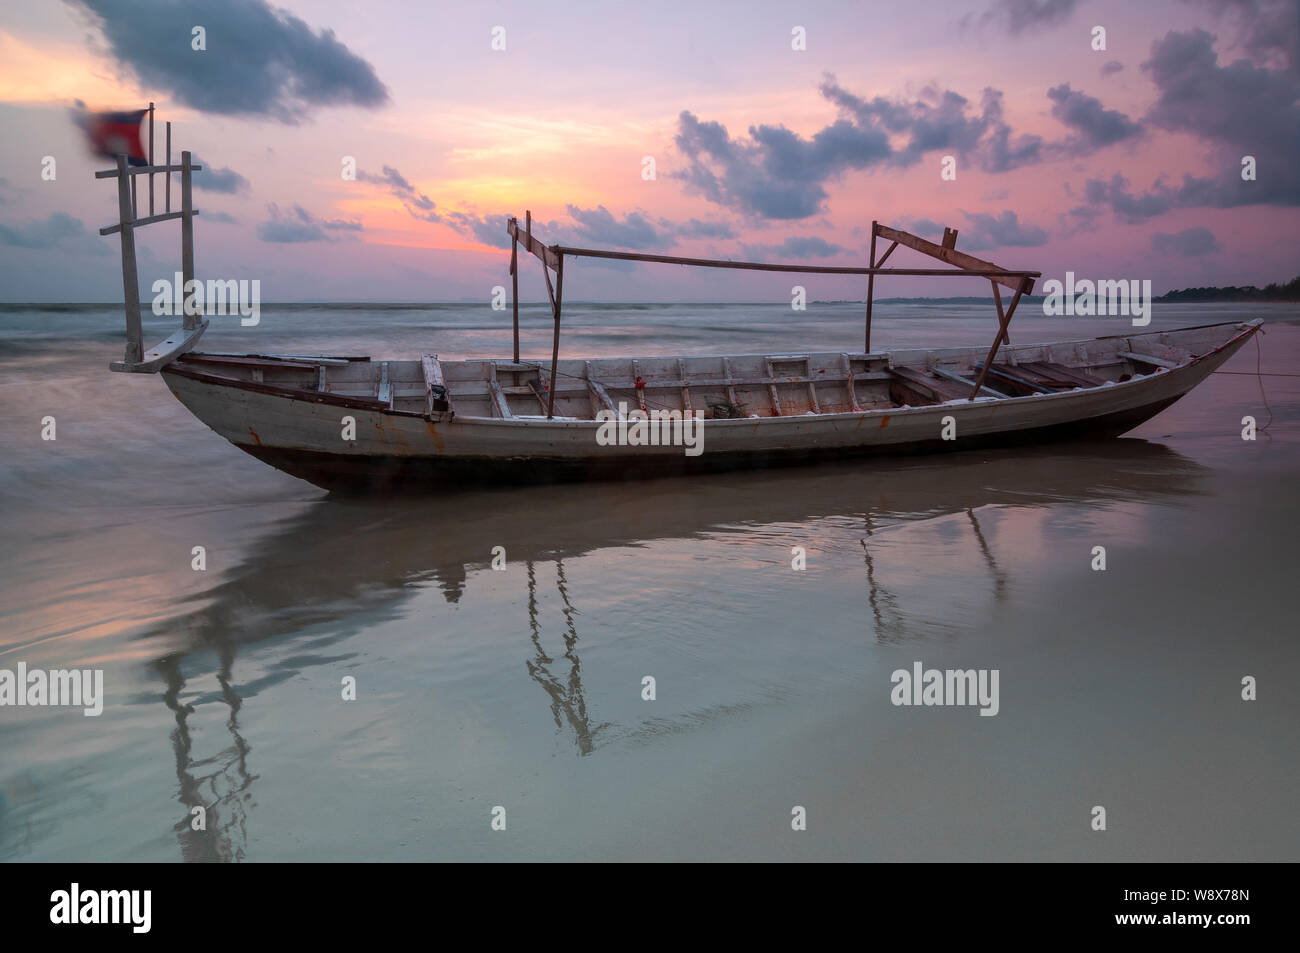 Long exposure of a fishing boat on Otres beach at sunset with blurred motion (waves and cambodian flag), Sihanoukville, Cambodia. Stock Photo